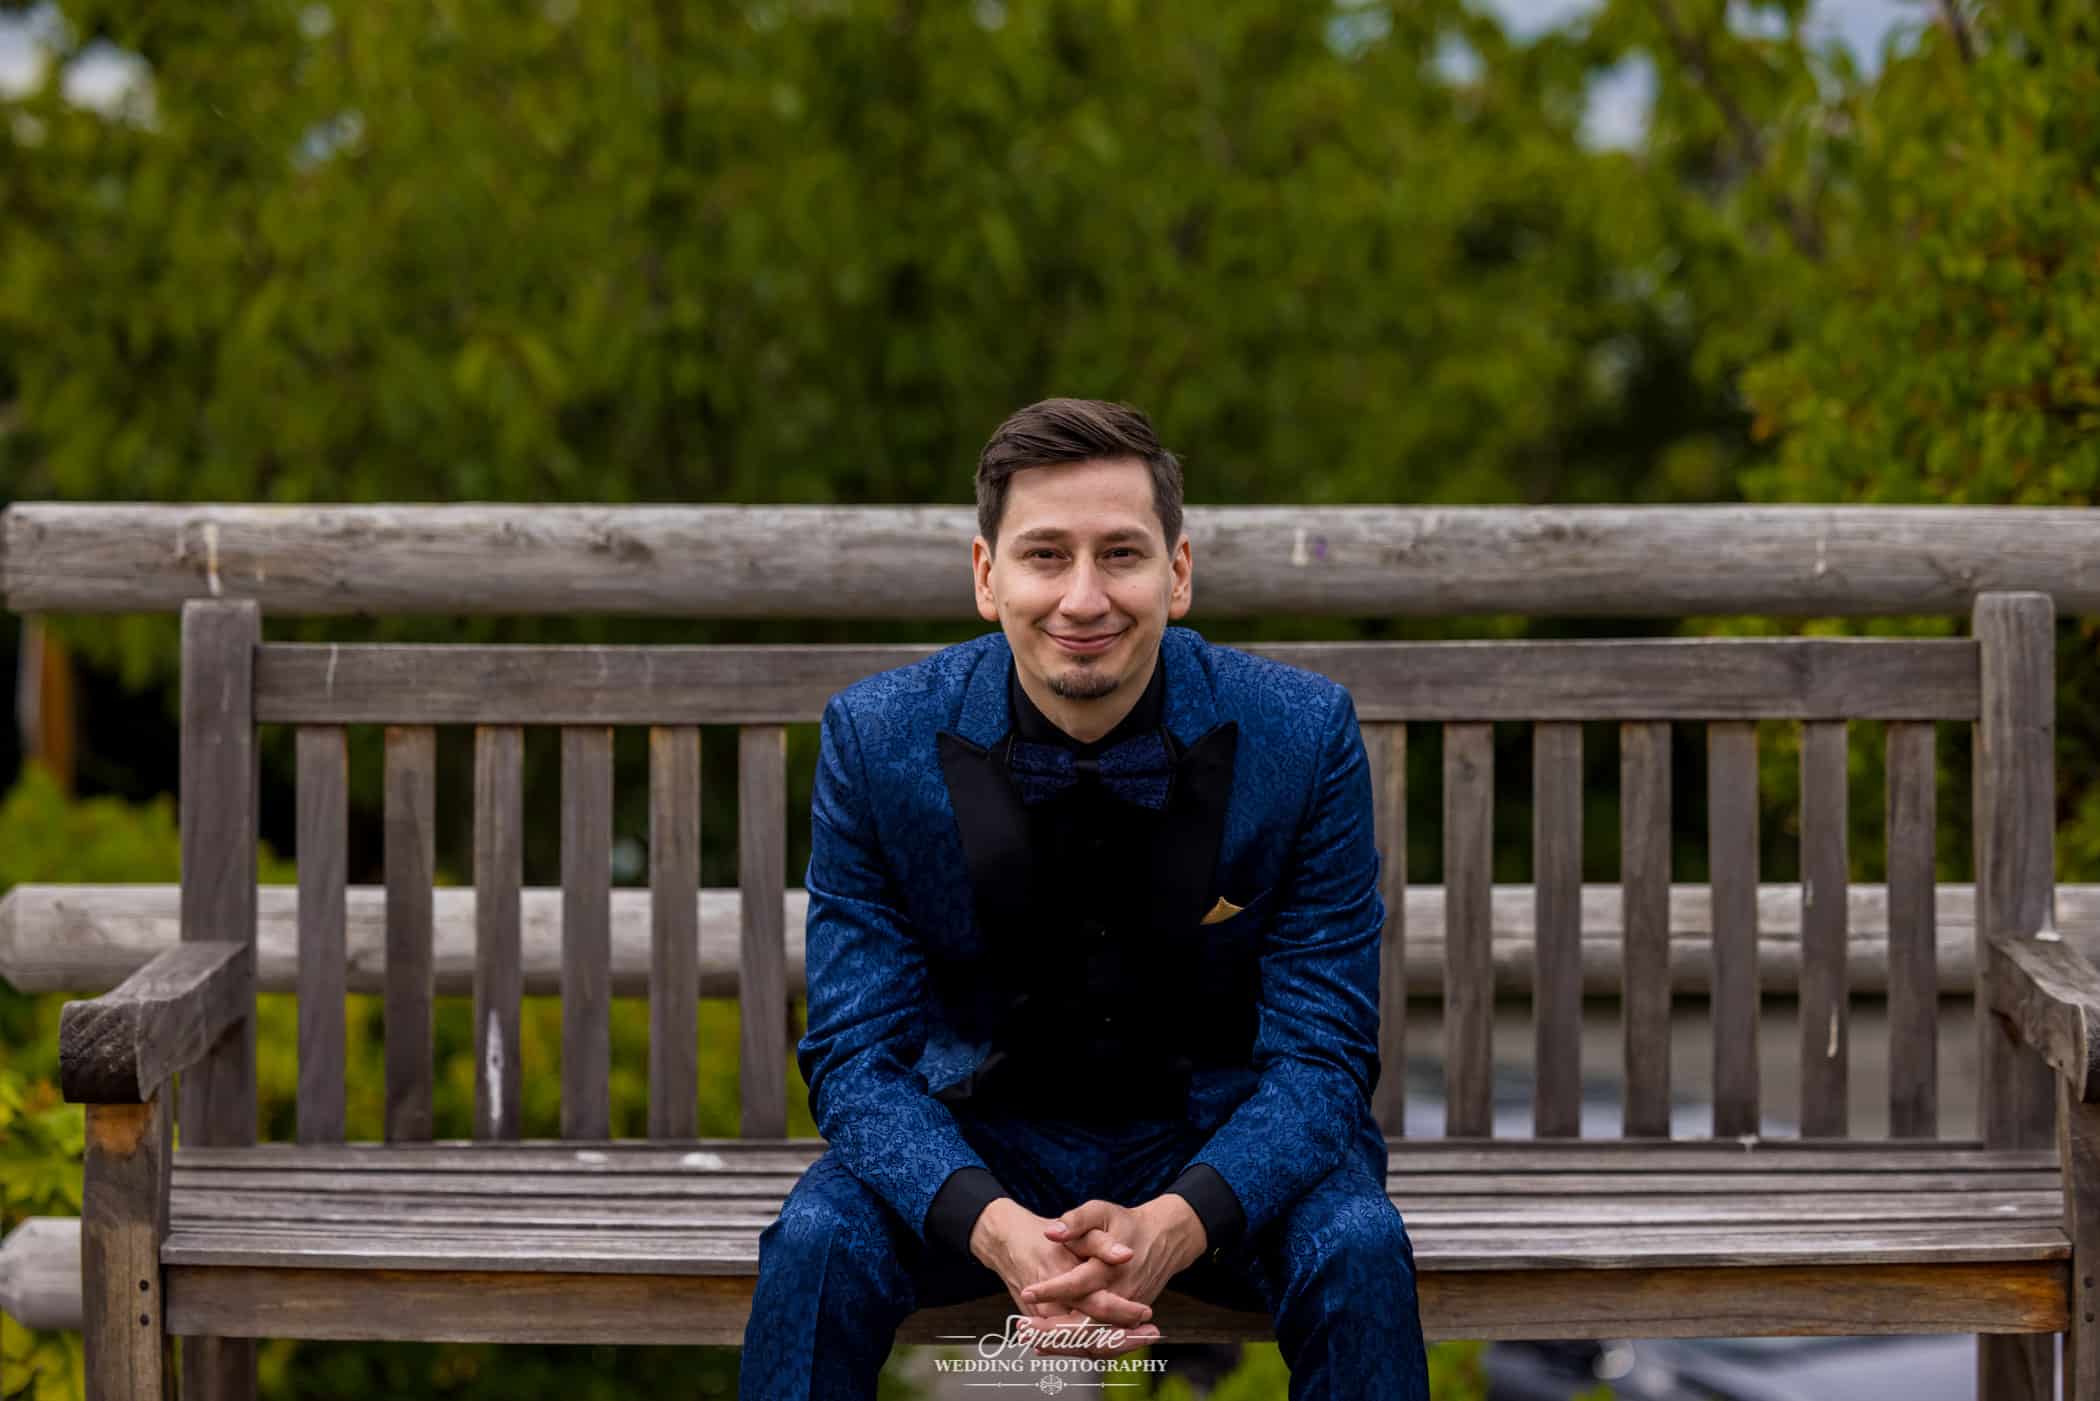 Groom sitting on bench smiling